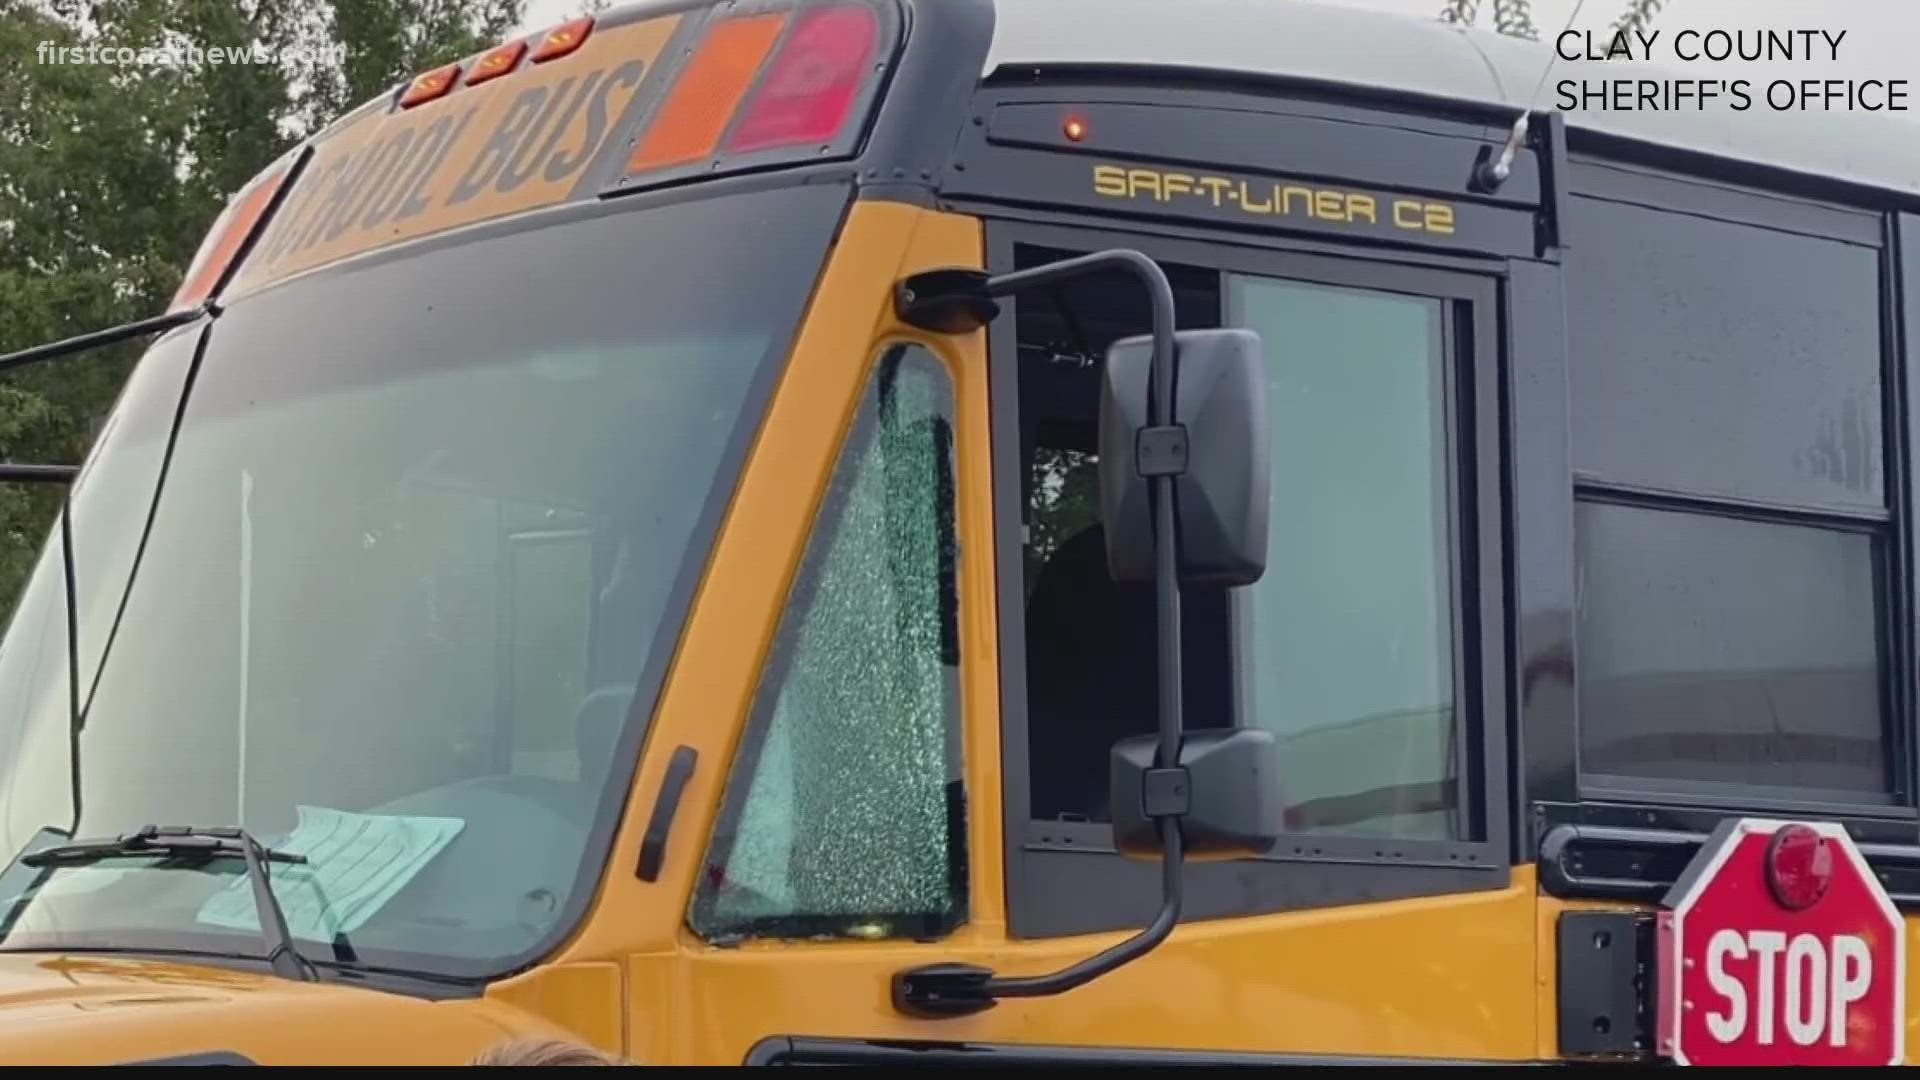 A juvenile has been arrested after deputies say they shot a BB gun at two Clay County school buses earlier this week.